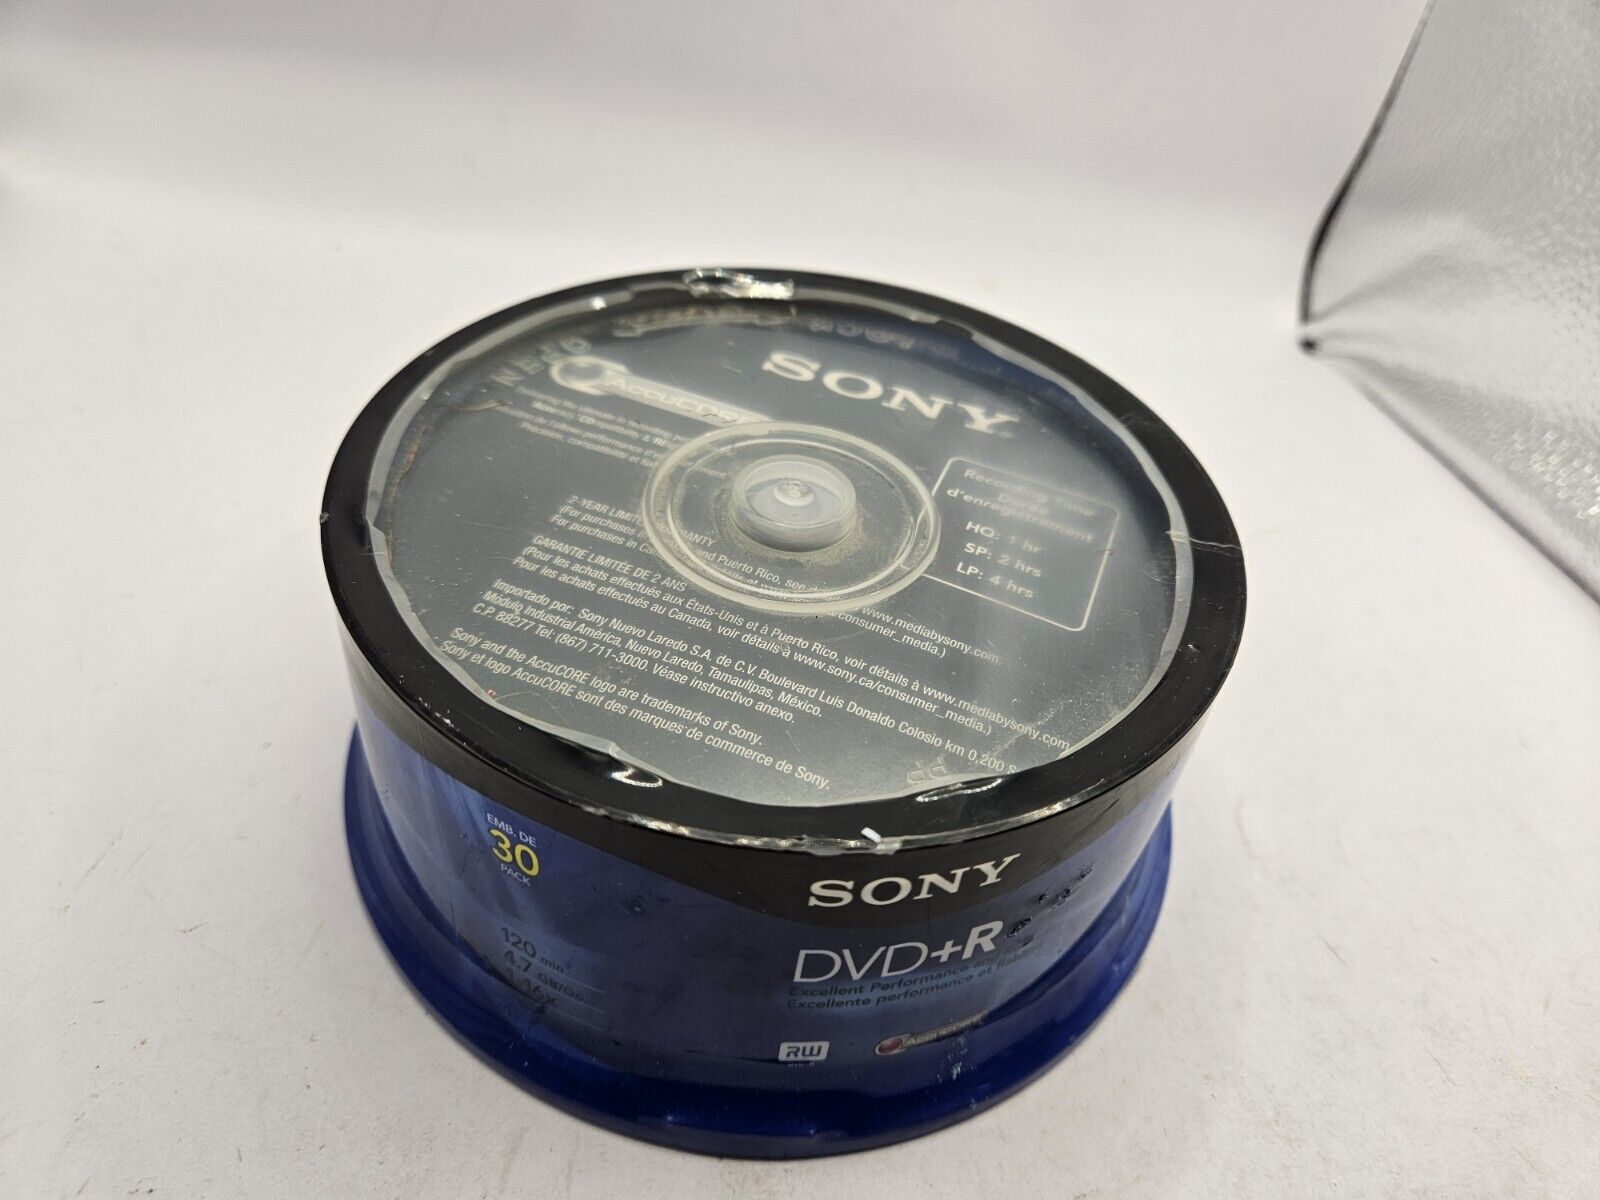 SONY DVD+R 30-Pack Spindle Blank Media 4.7GB - 120 min Recordable NEW SEALED